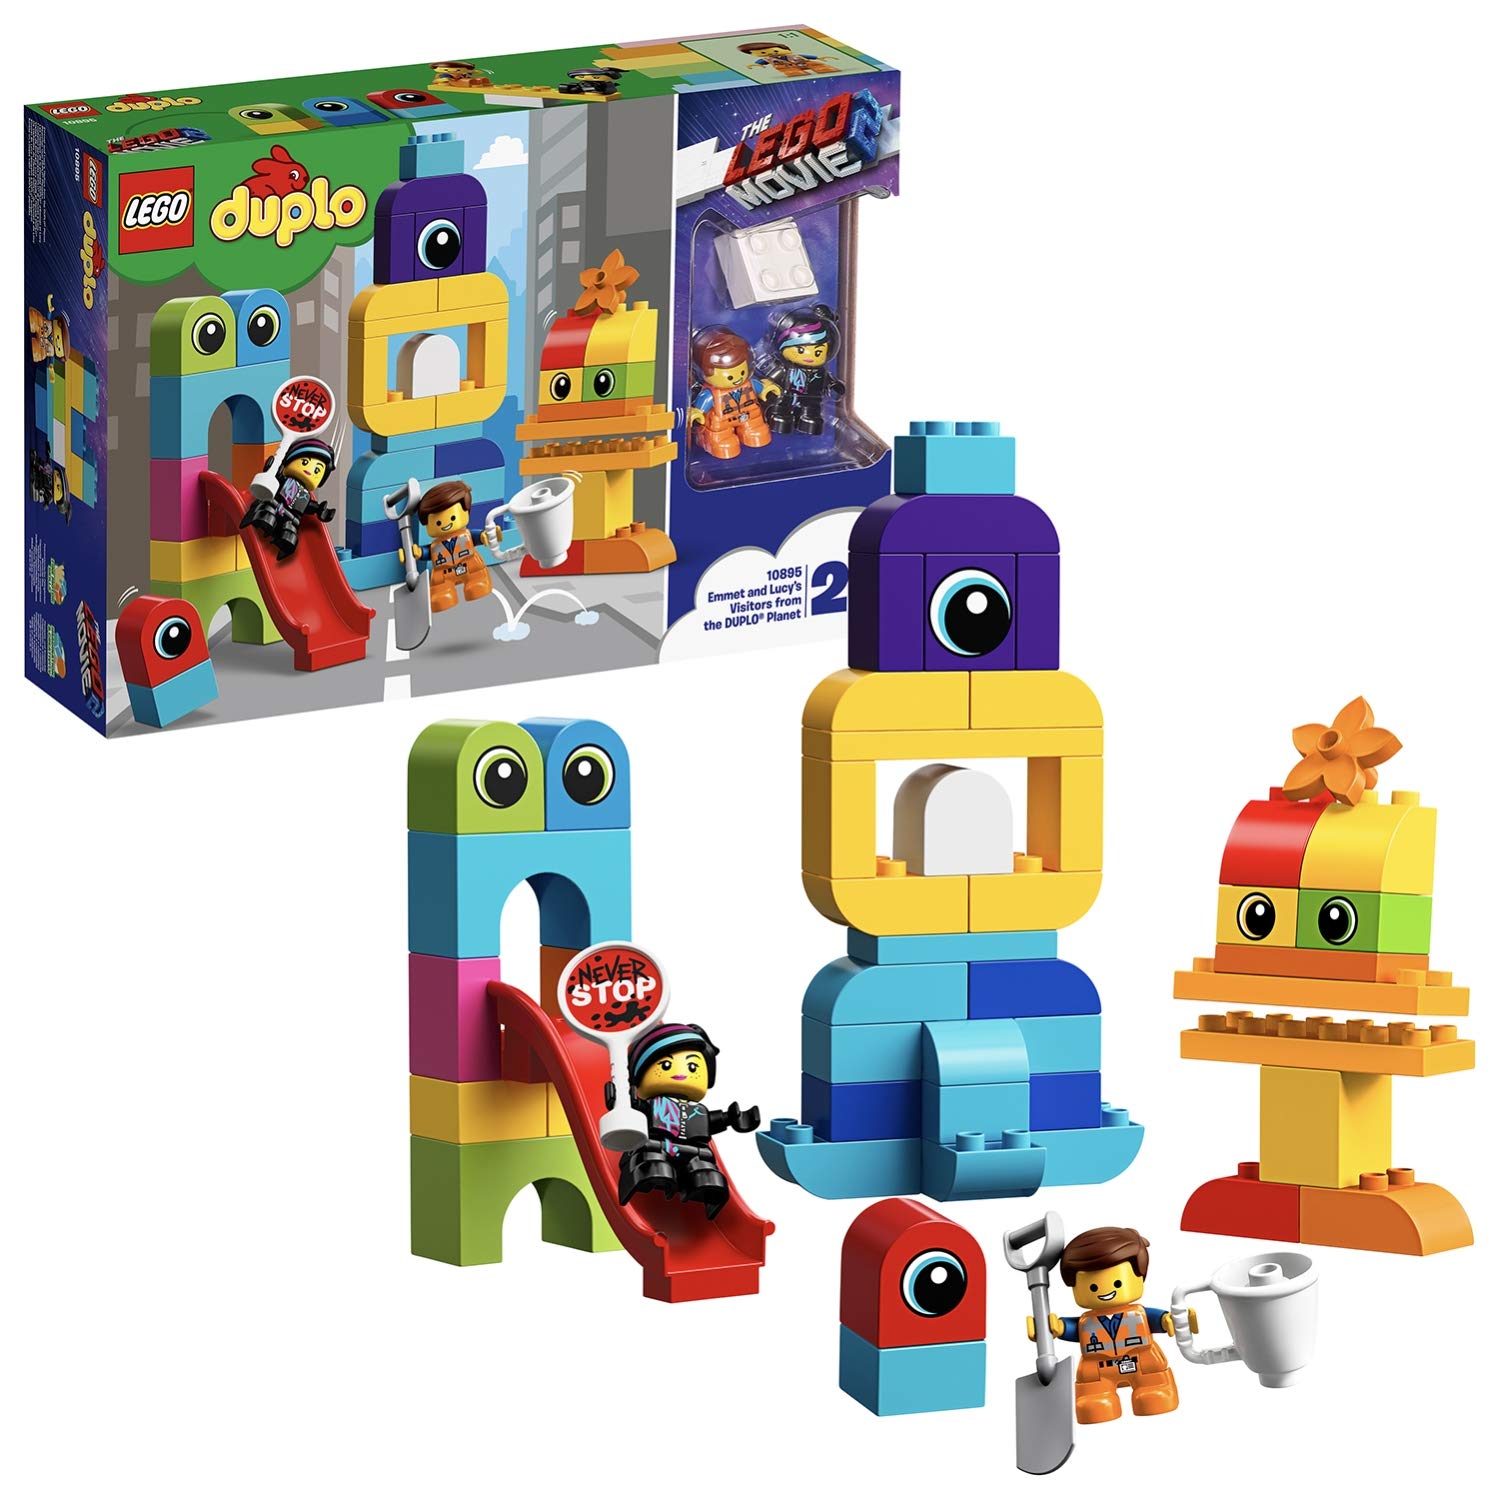 LEGO DUPLO THE LEGO MOVIE 2 visitors to the LEGO® DUPLO® planet, Planets